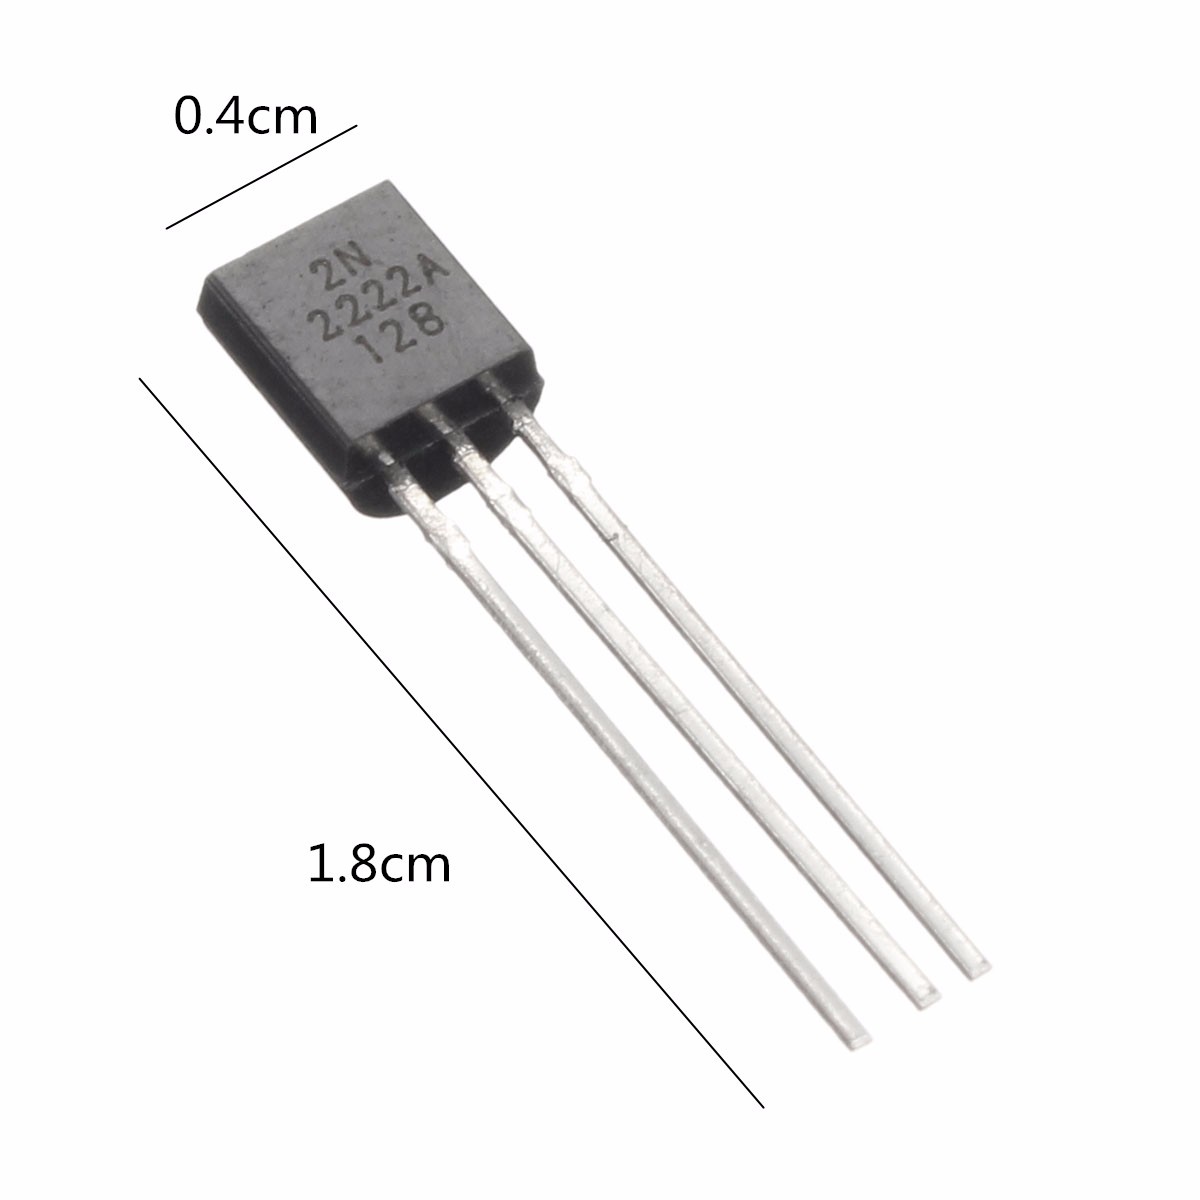 40V-08A-NPN-Transistors-2N2222A-2N2222-TO-92--For-High-speed-Switching-1045862